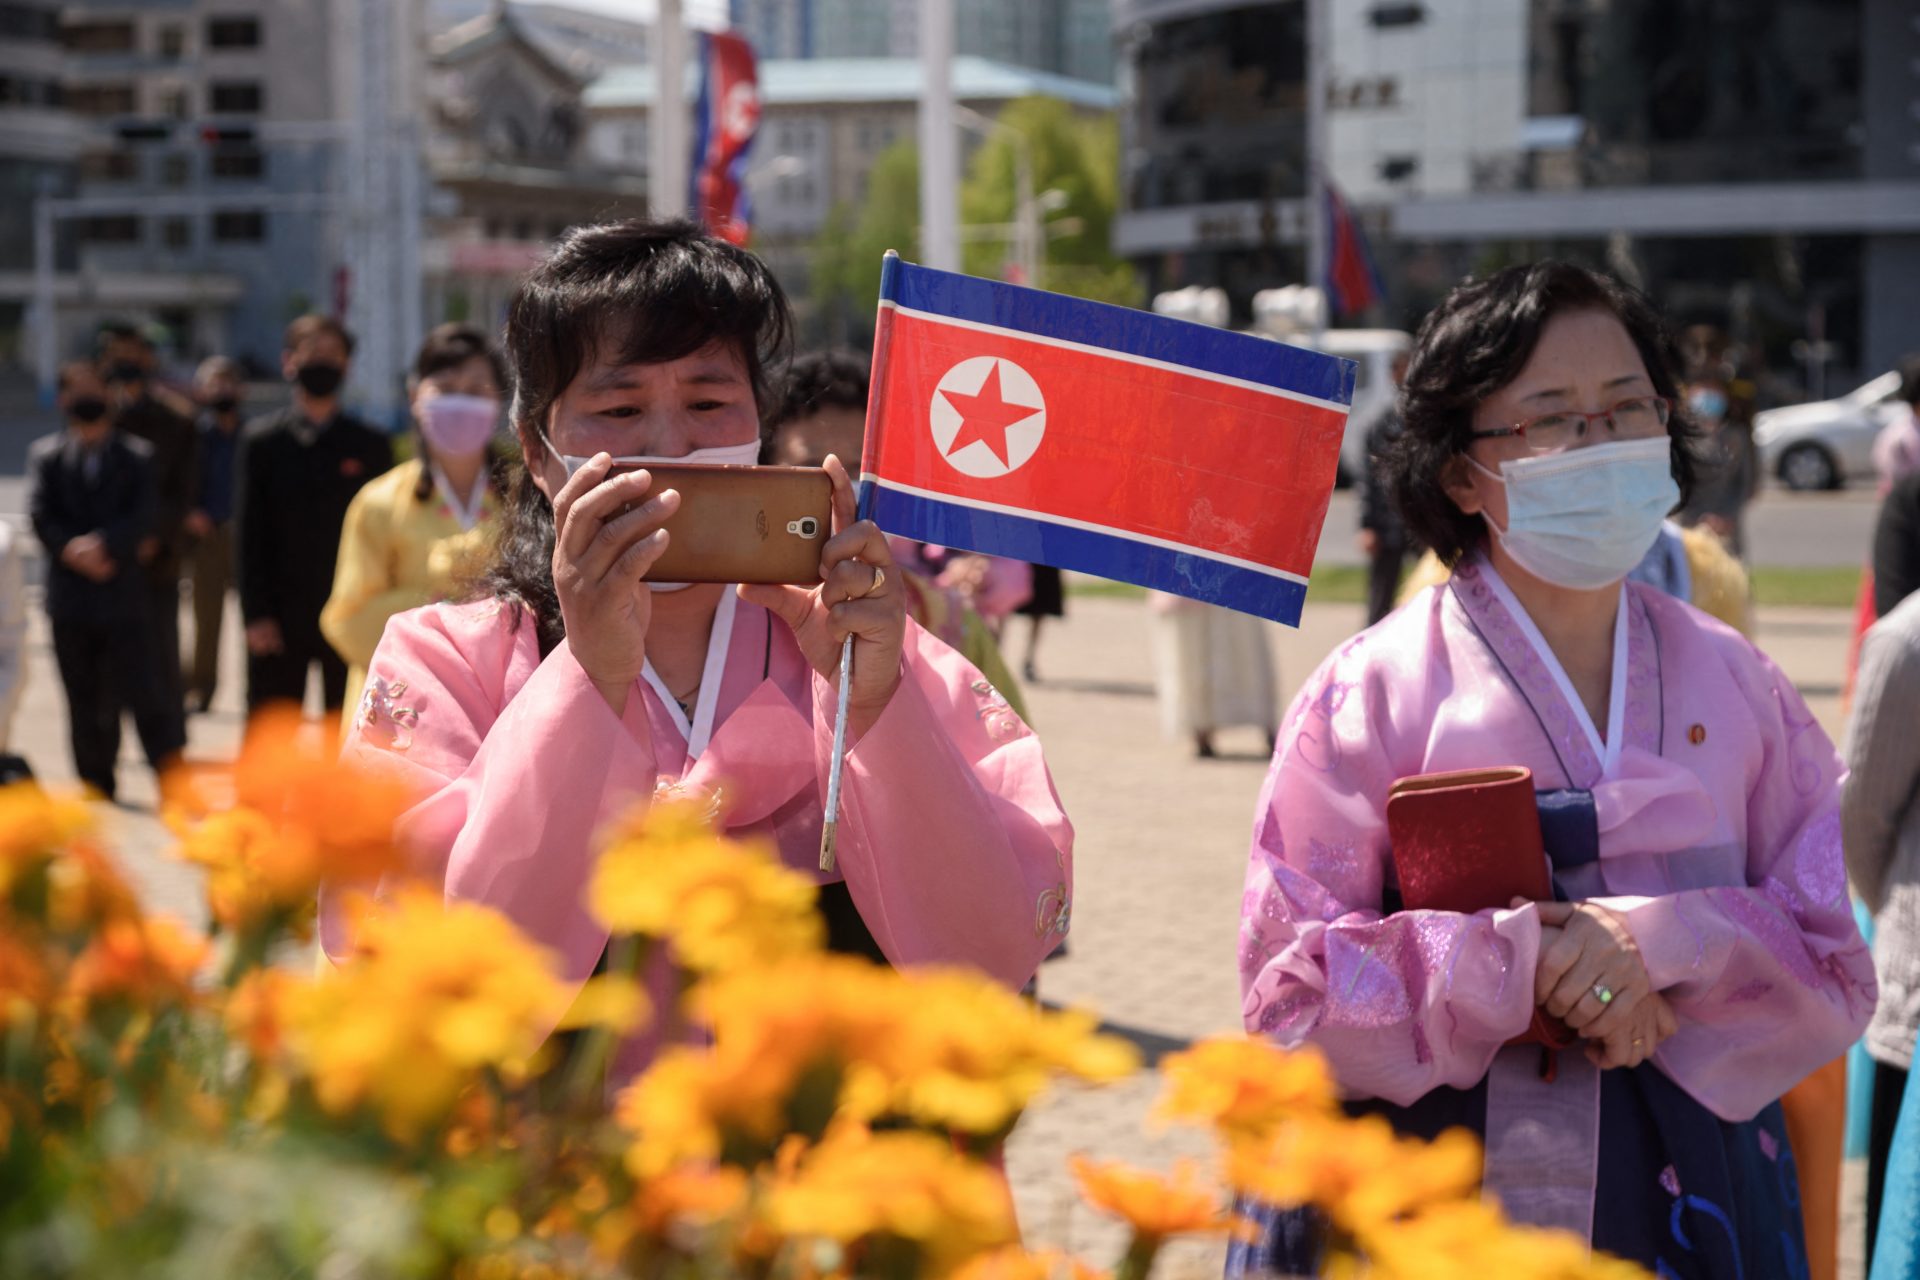 North Korea has discovered the power of influencers and it is scary